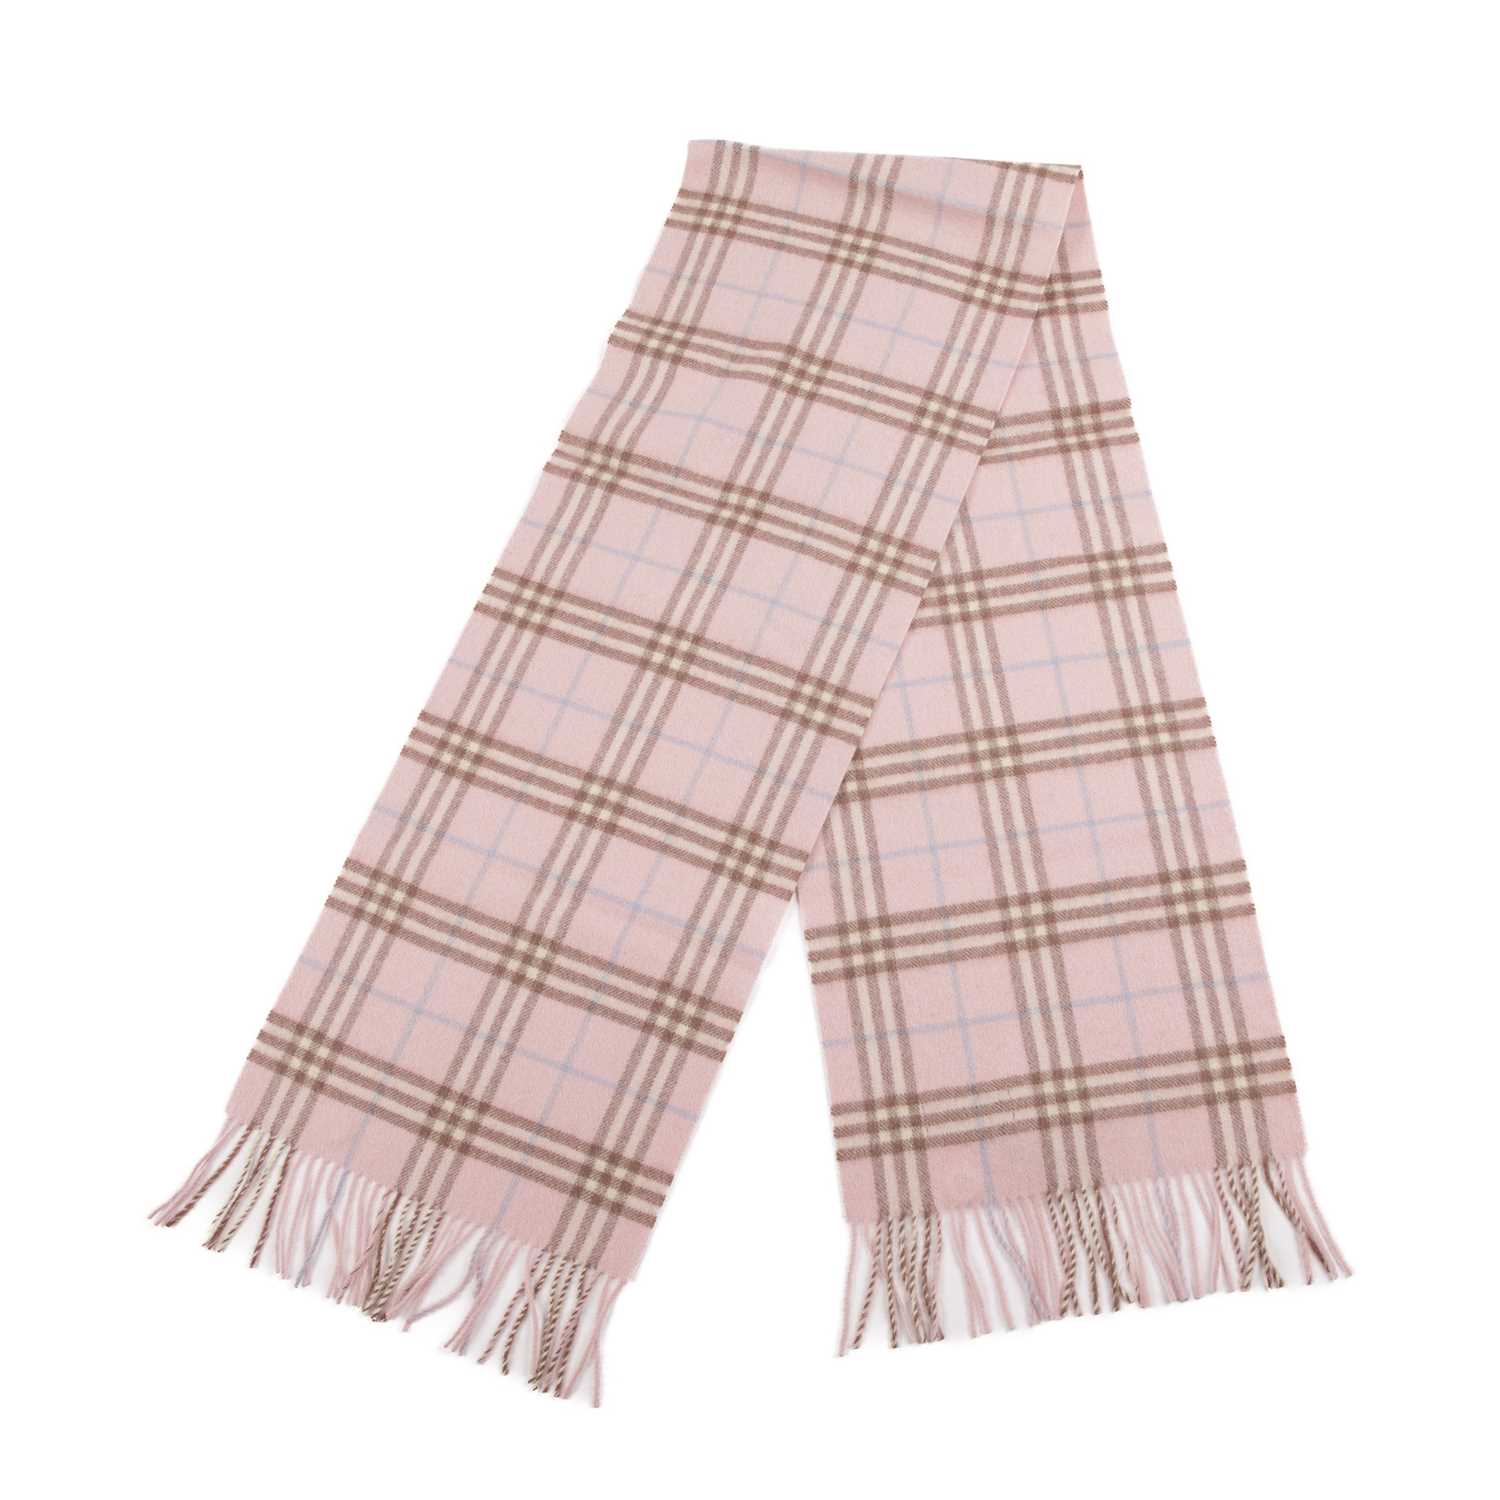 Burberry, two Nova Check lambswool scarves, to include a rose pink scarf with fringe detailing at - Image 4 of 4